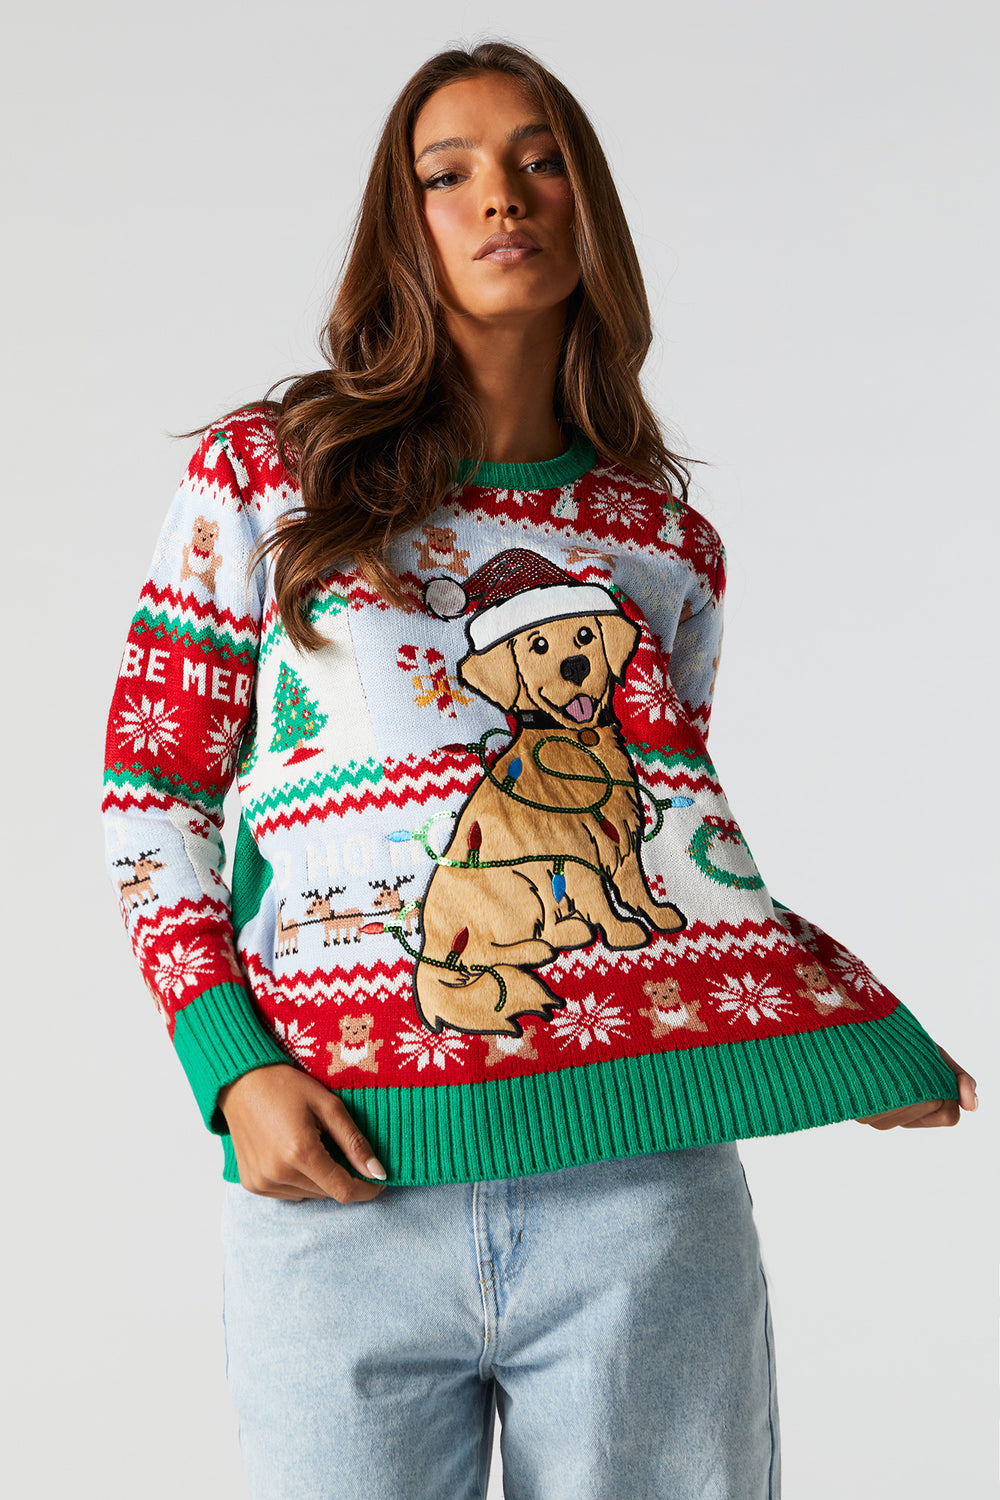 Sequin Puppy Christmas Sweater Sequin Puppy Christmas Sweater 1